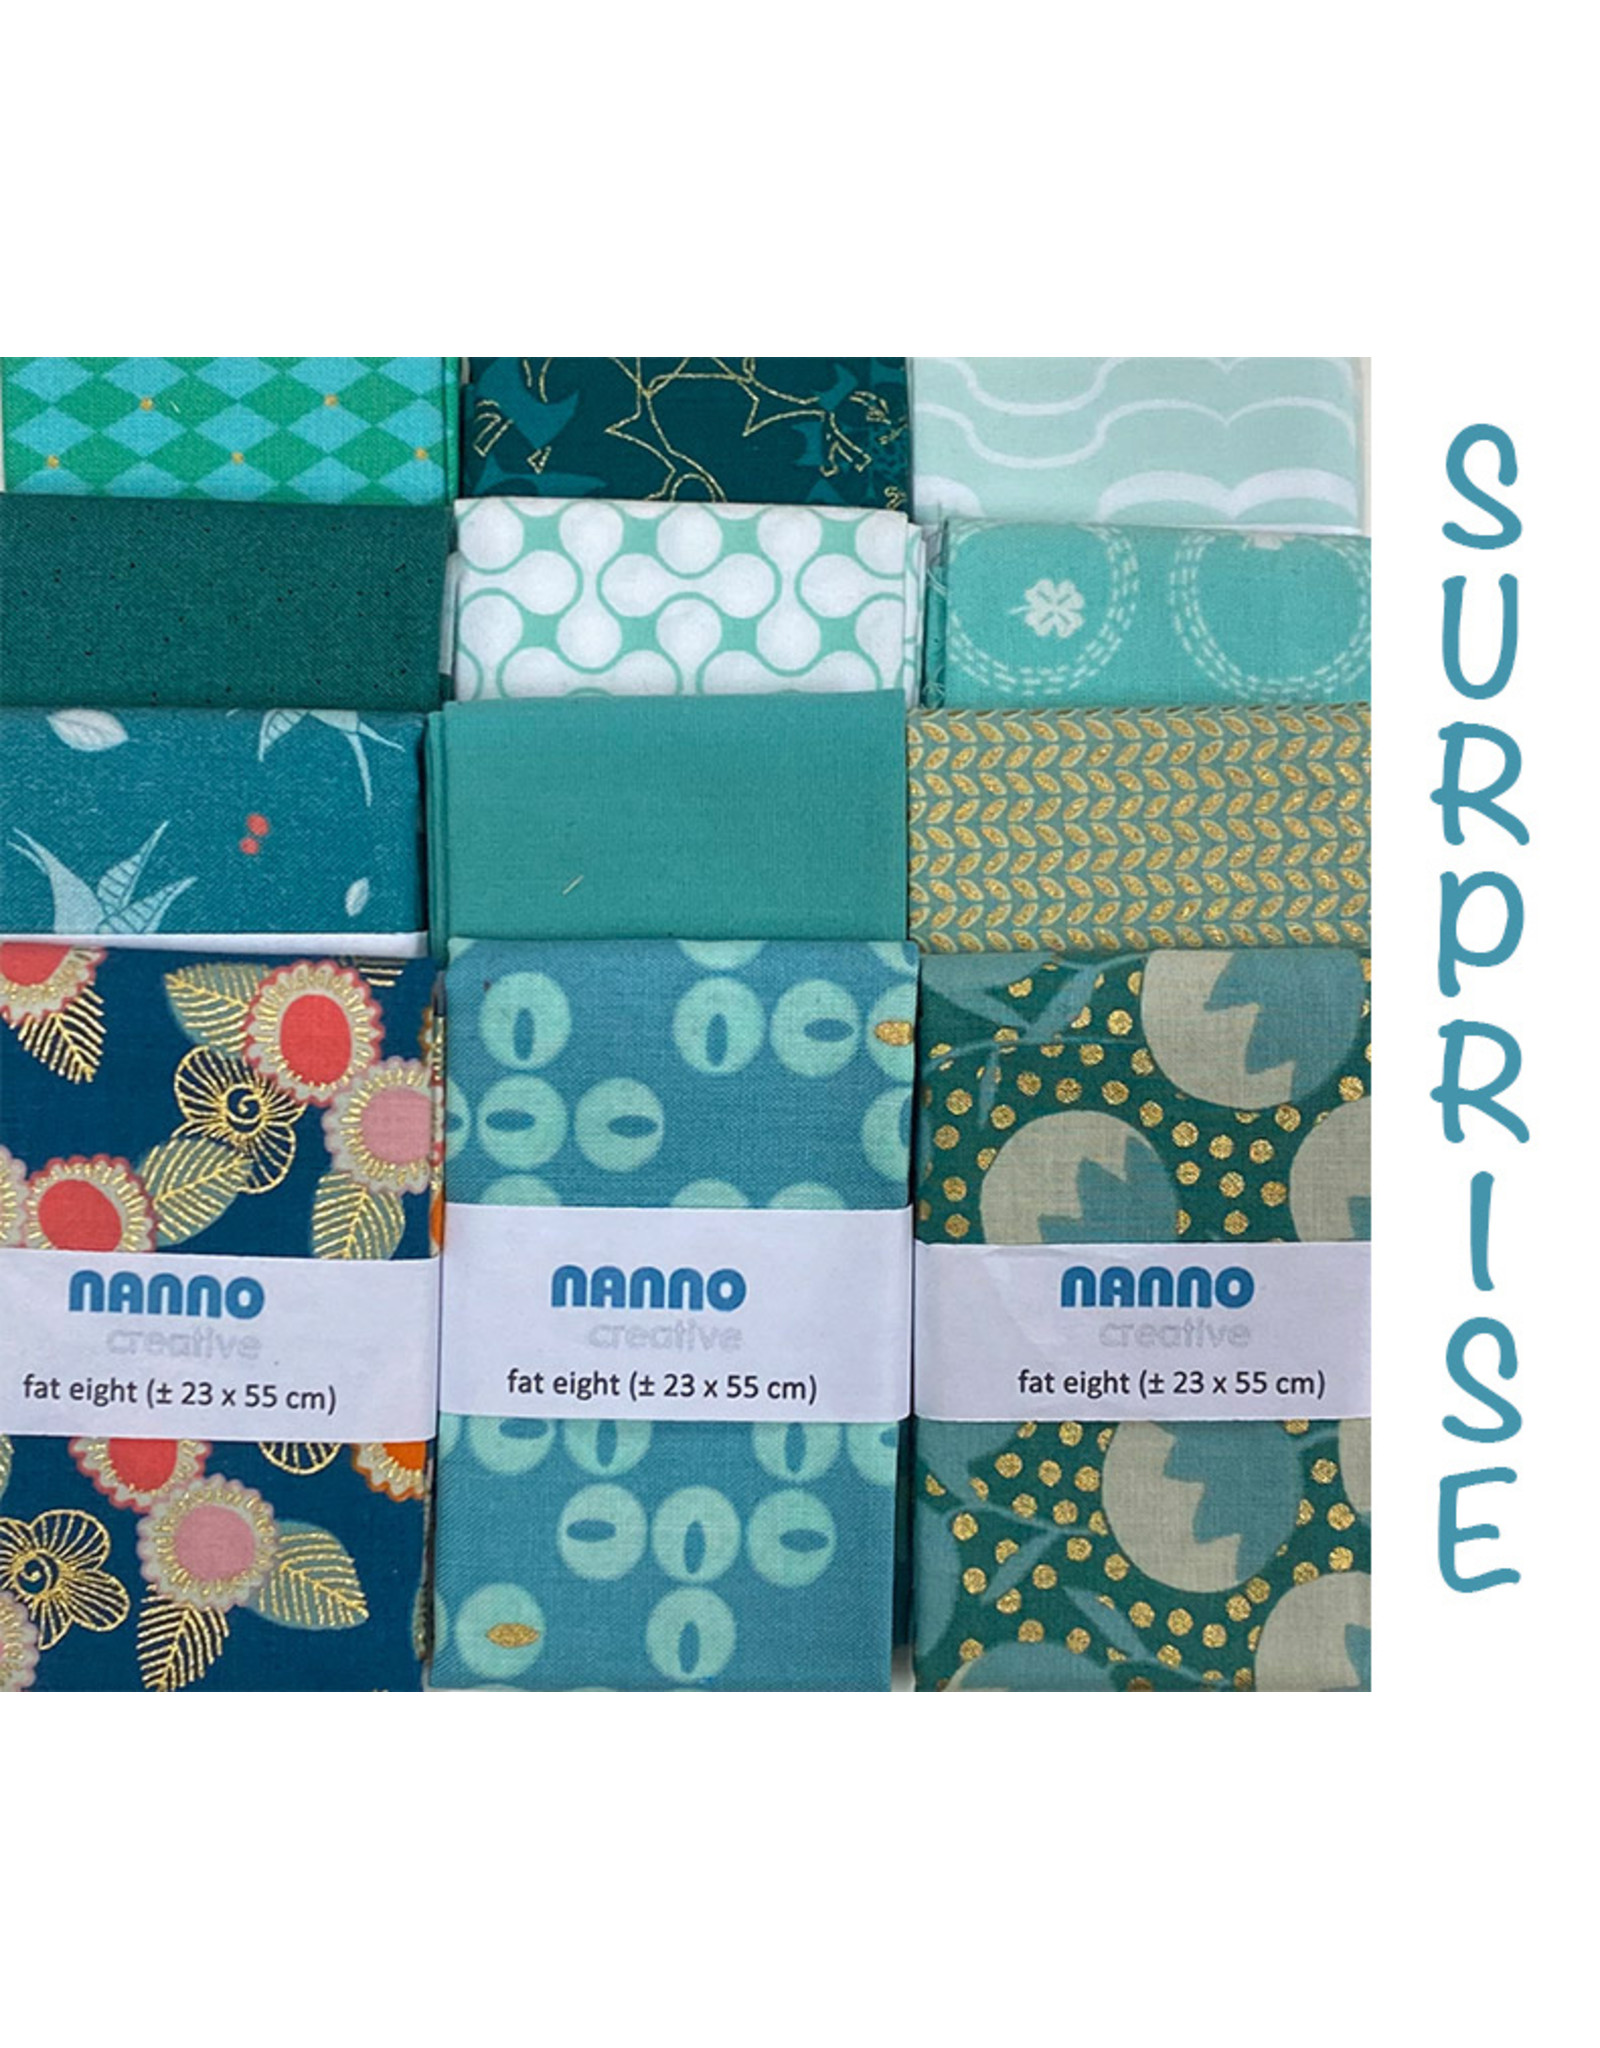 Surprise Bundle  with 5 Fat Eights - Teal